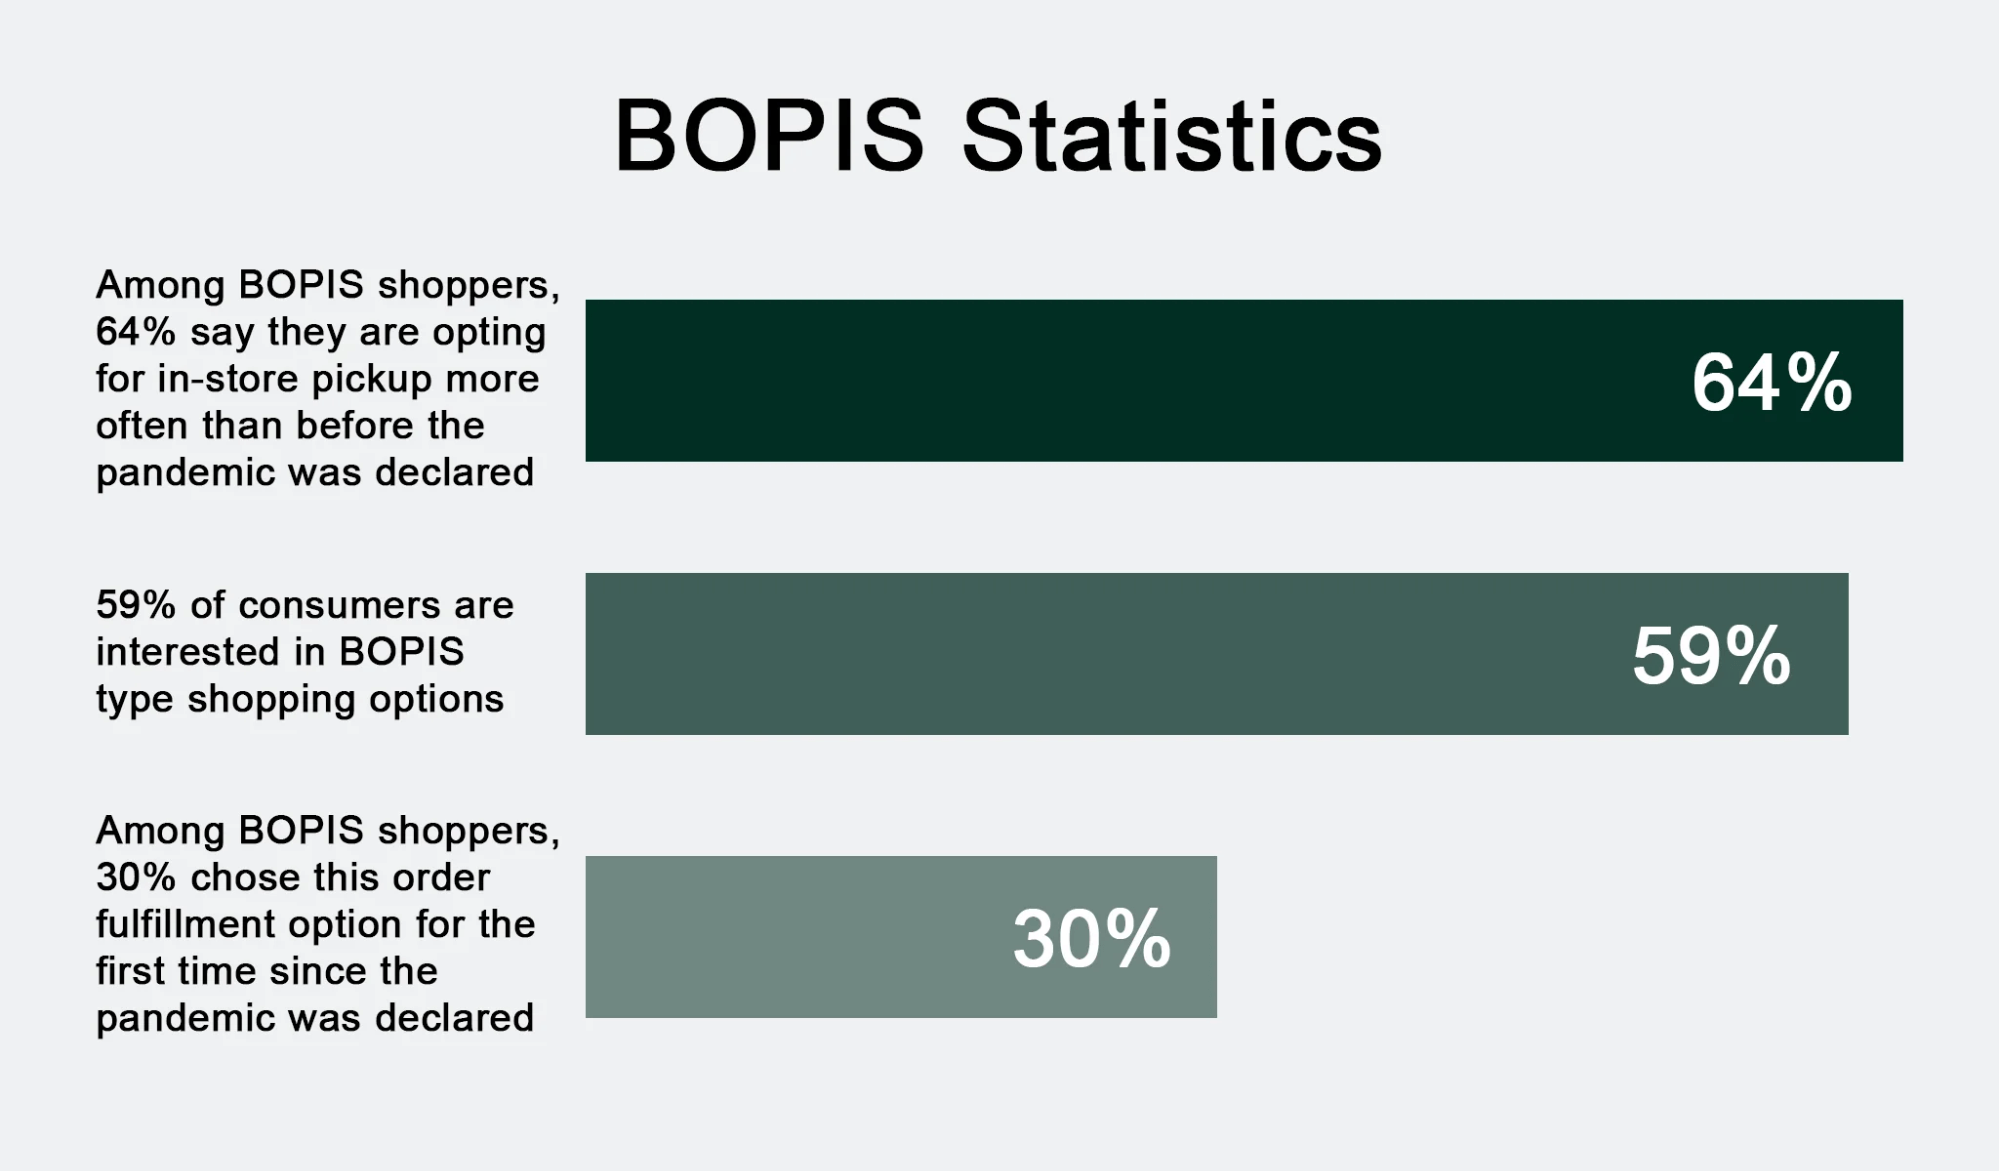 Image showing the increase in purchase activity due to adoption of BOPIS